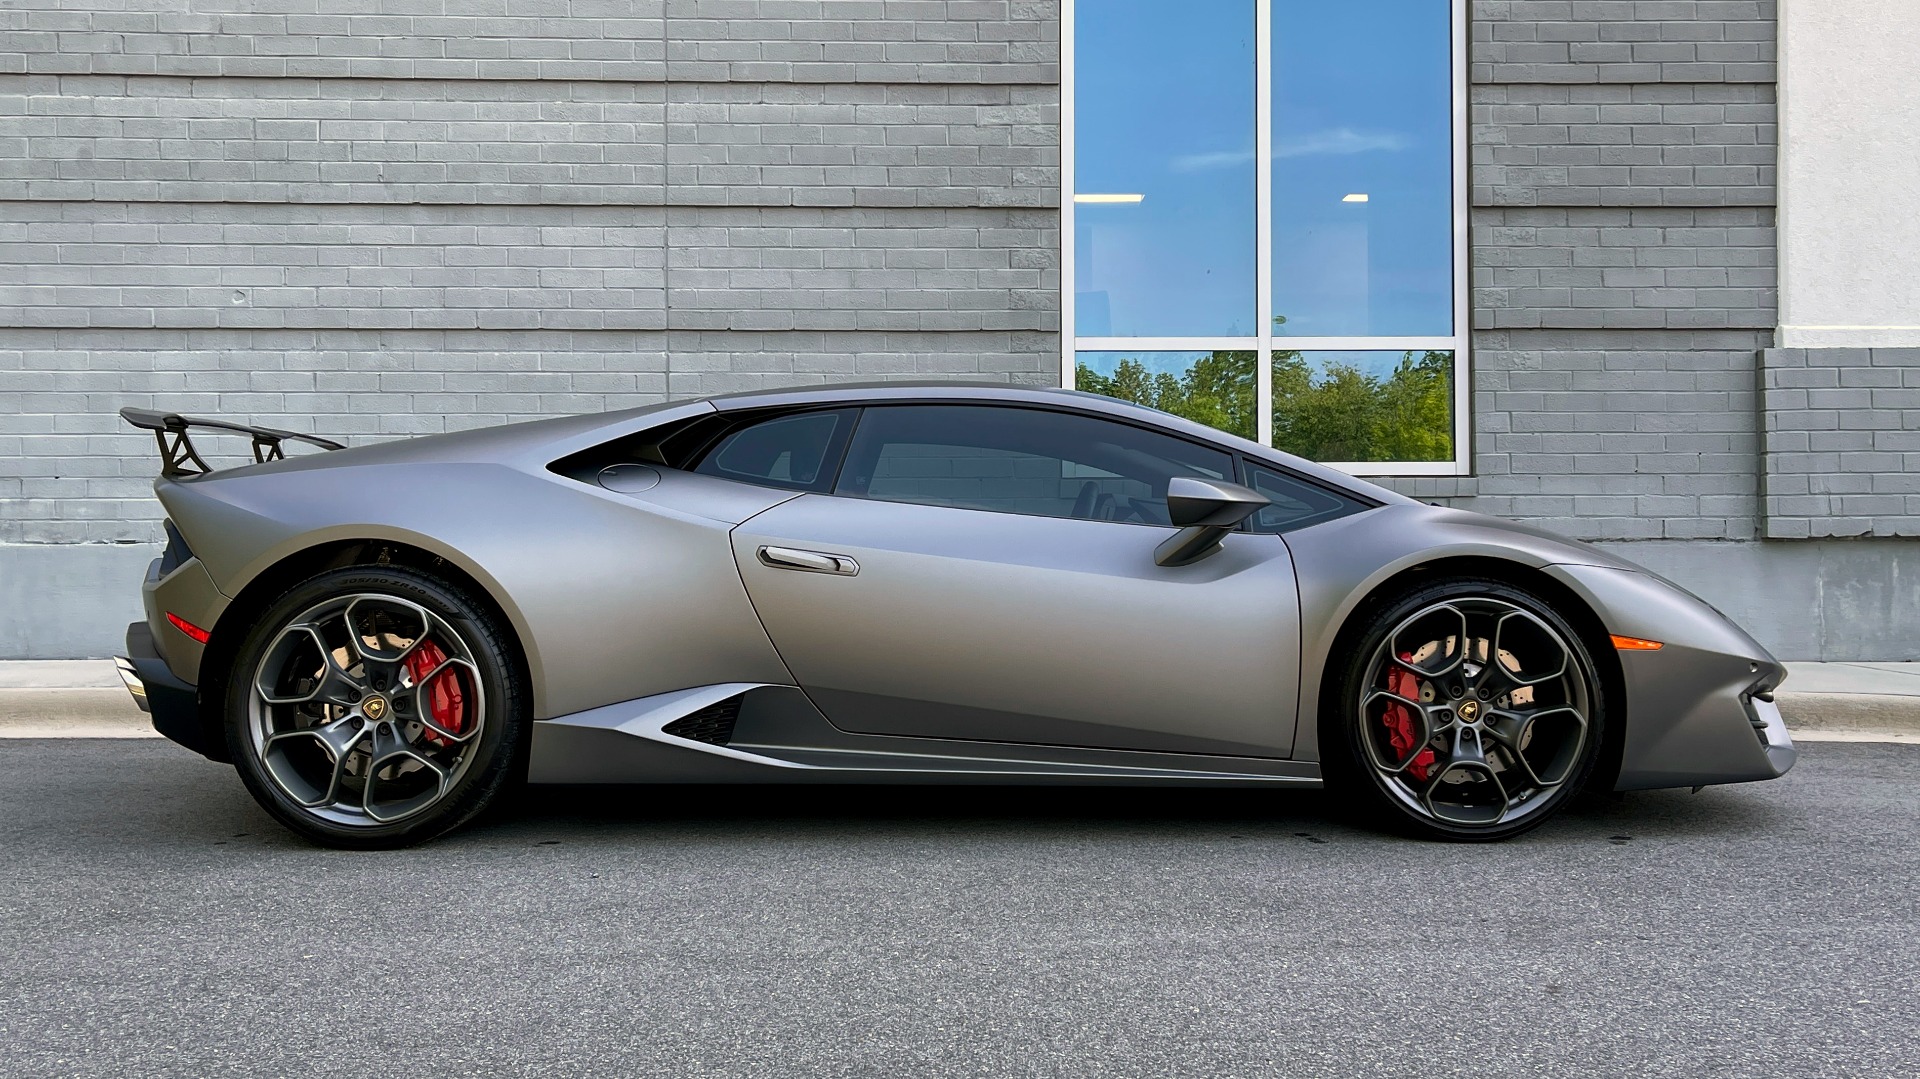 Used 2019 Lamborghini HURACAN LP 580-2 / 5.2L V10 (571HP) / 7-SPD AUTO / RWD / REARVIEW for sale $254,999 at Formula Imports in Charlotte NC 28227 4